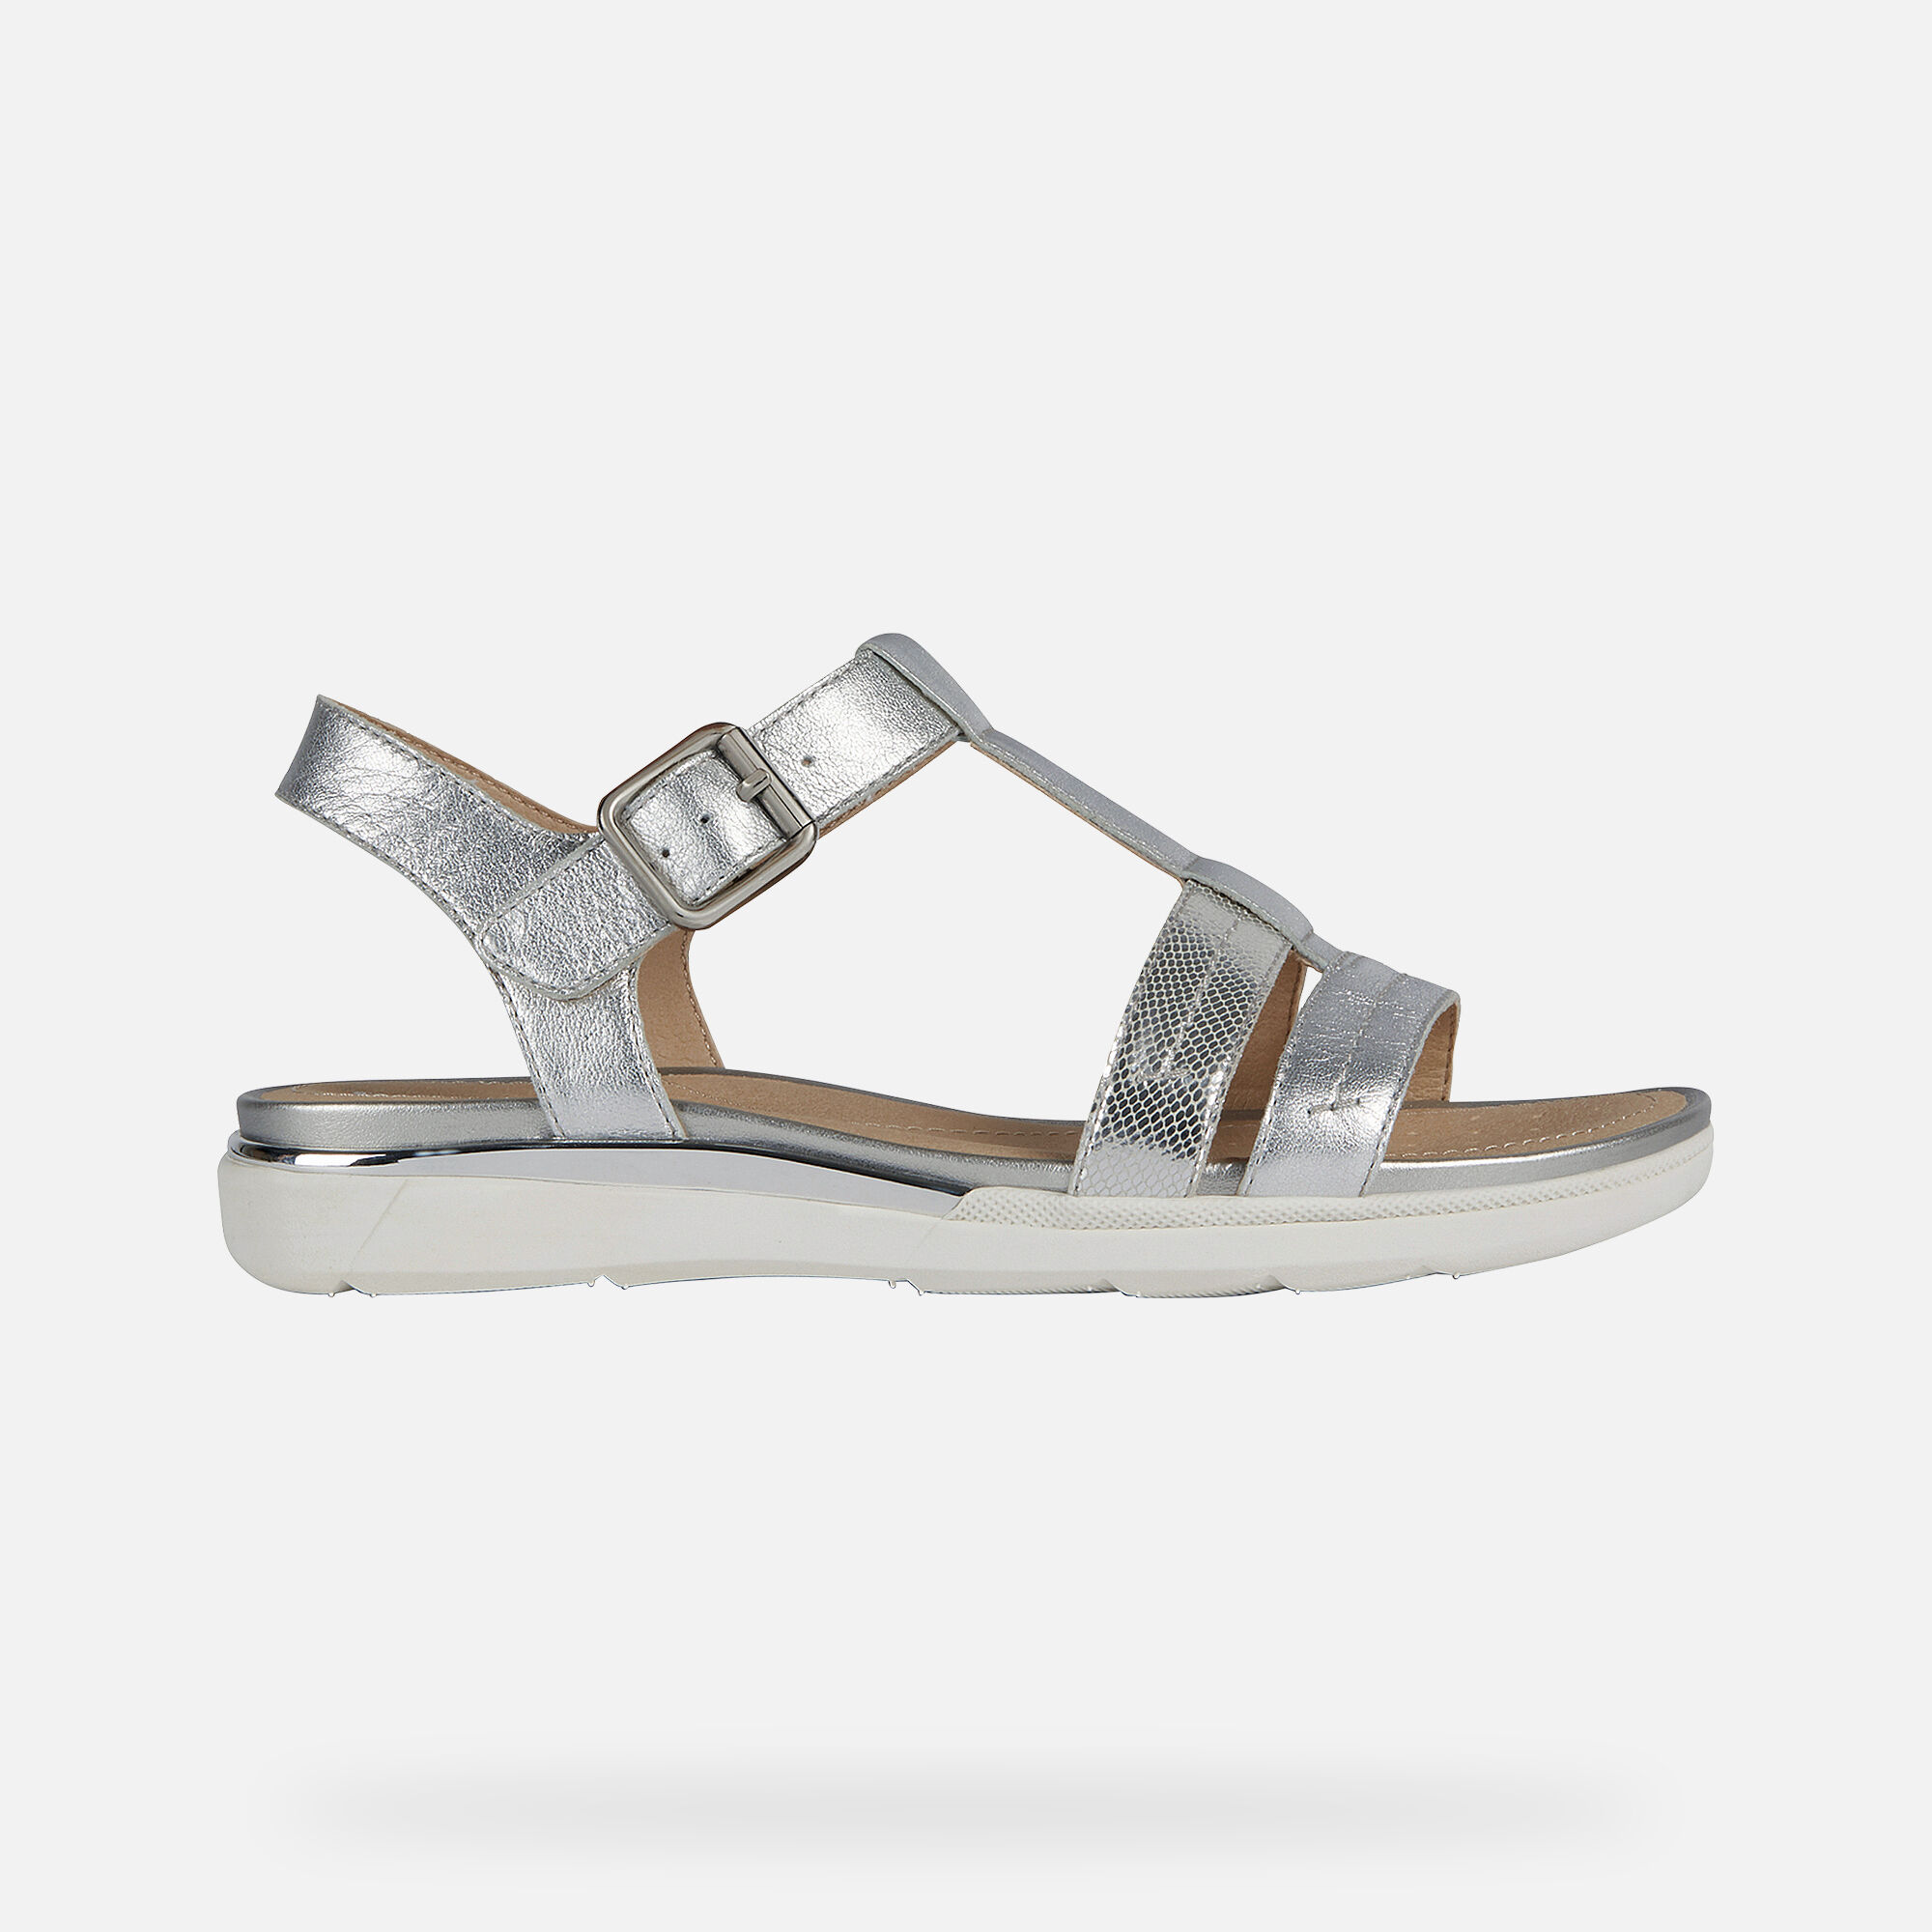 Geox HIVER Woman: Silver Sandals | Geox 